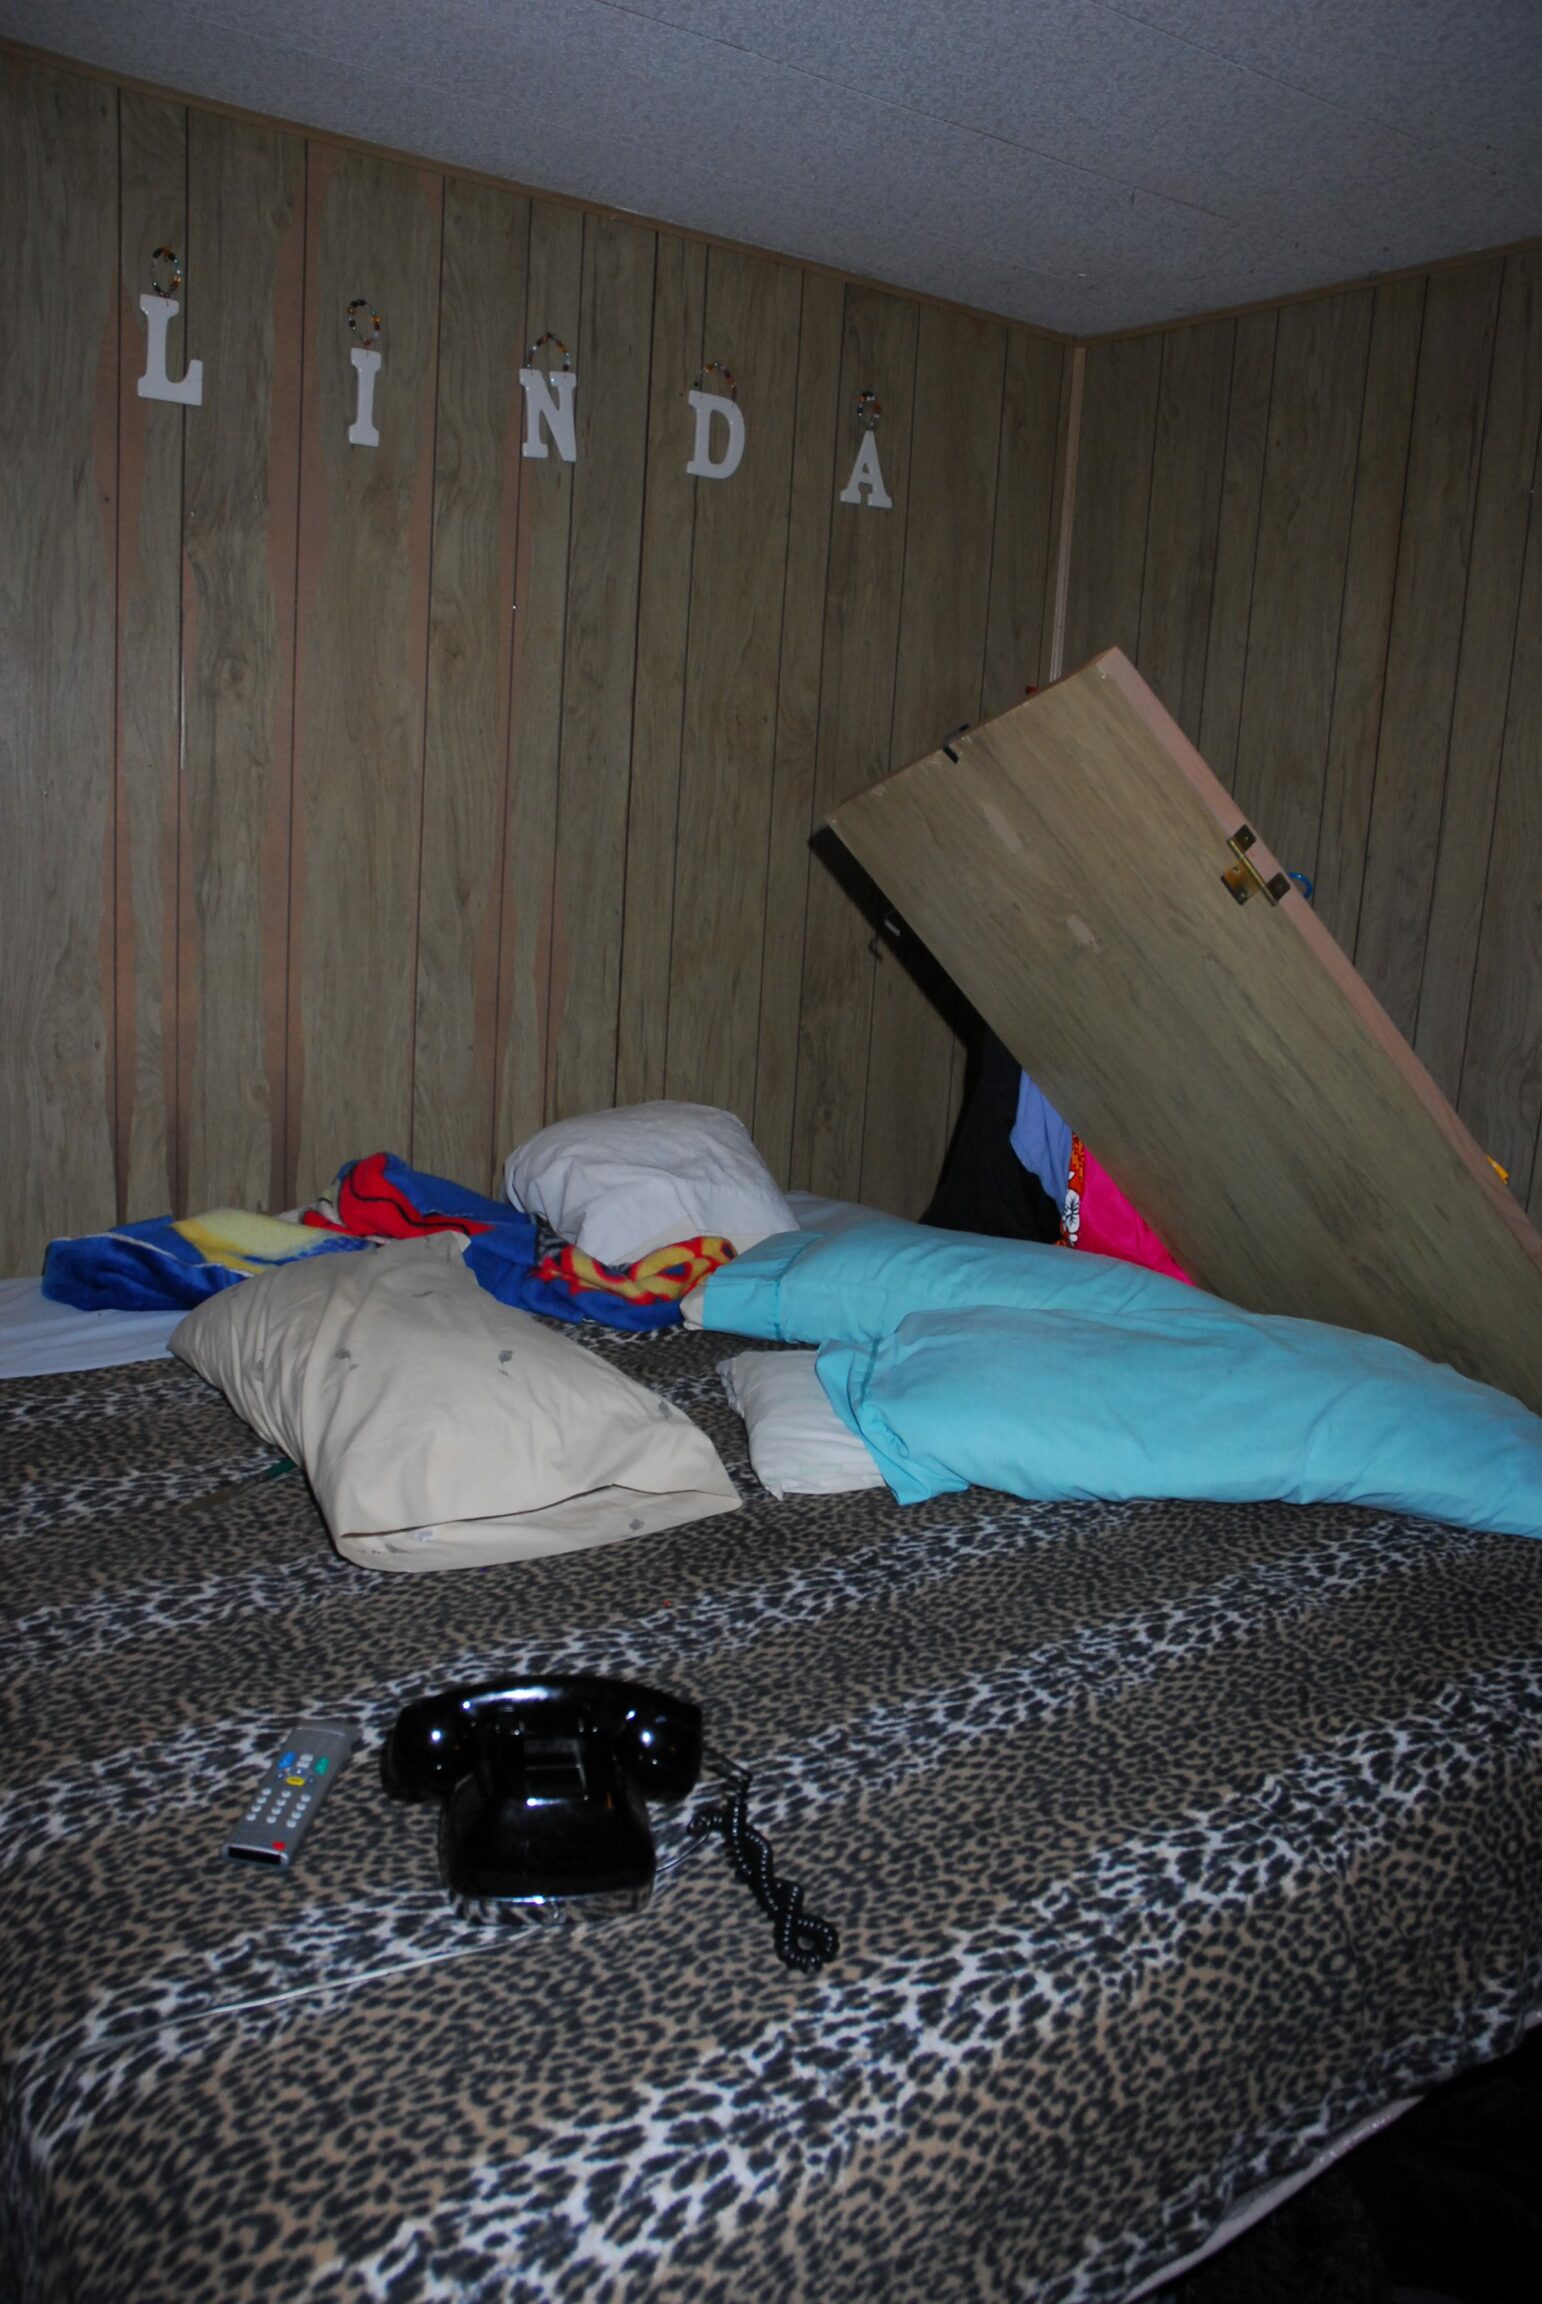 A wooden bathroom door lies against a bed covered in a faux leopard print comforter in a wood-paneled room. A black rotary phone, television remote and pillows are scattered across the bed. The name "Linda" is spelled out in plastic letters mounted to the wall.